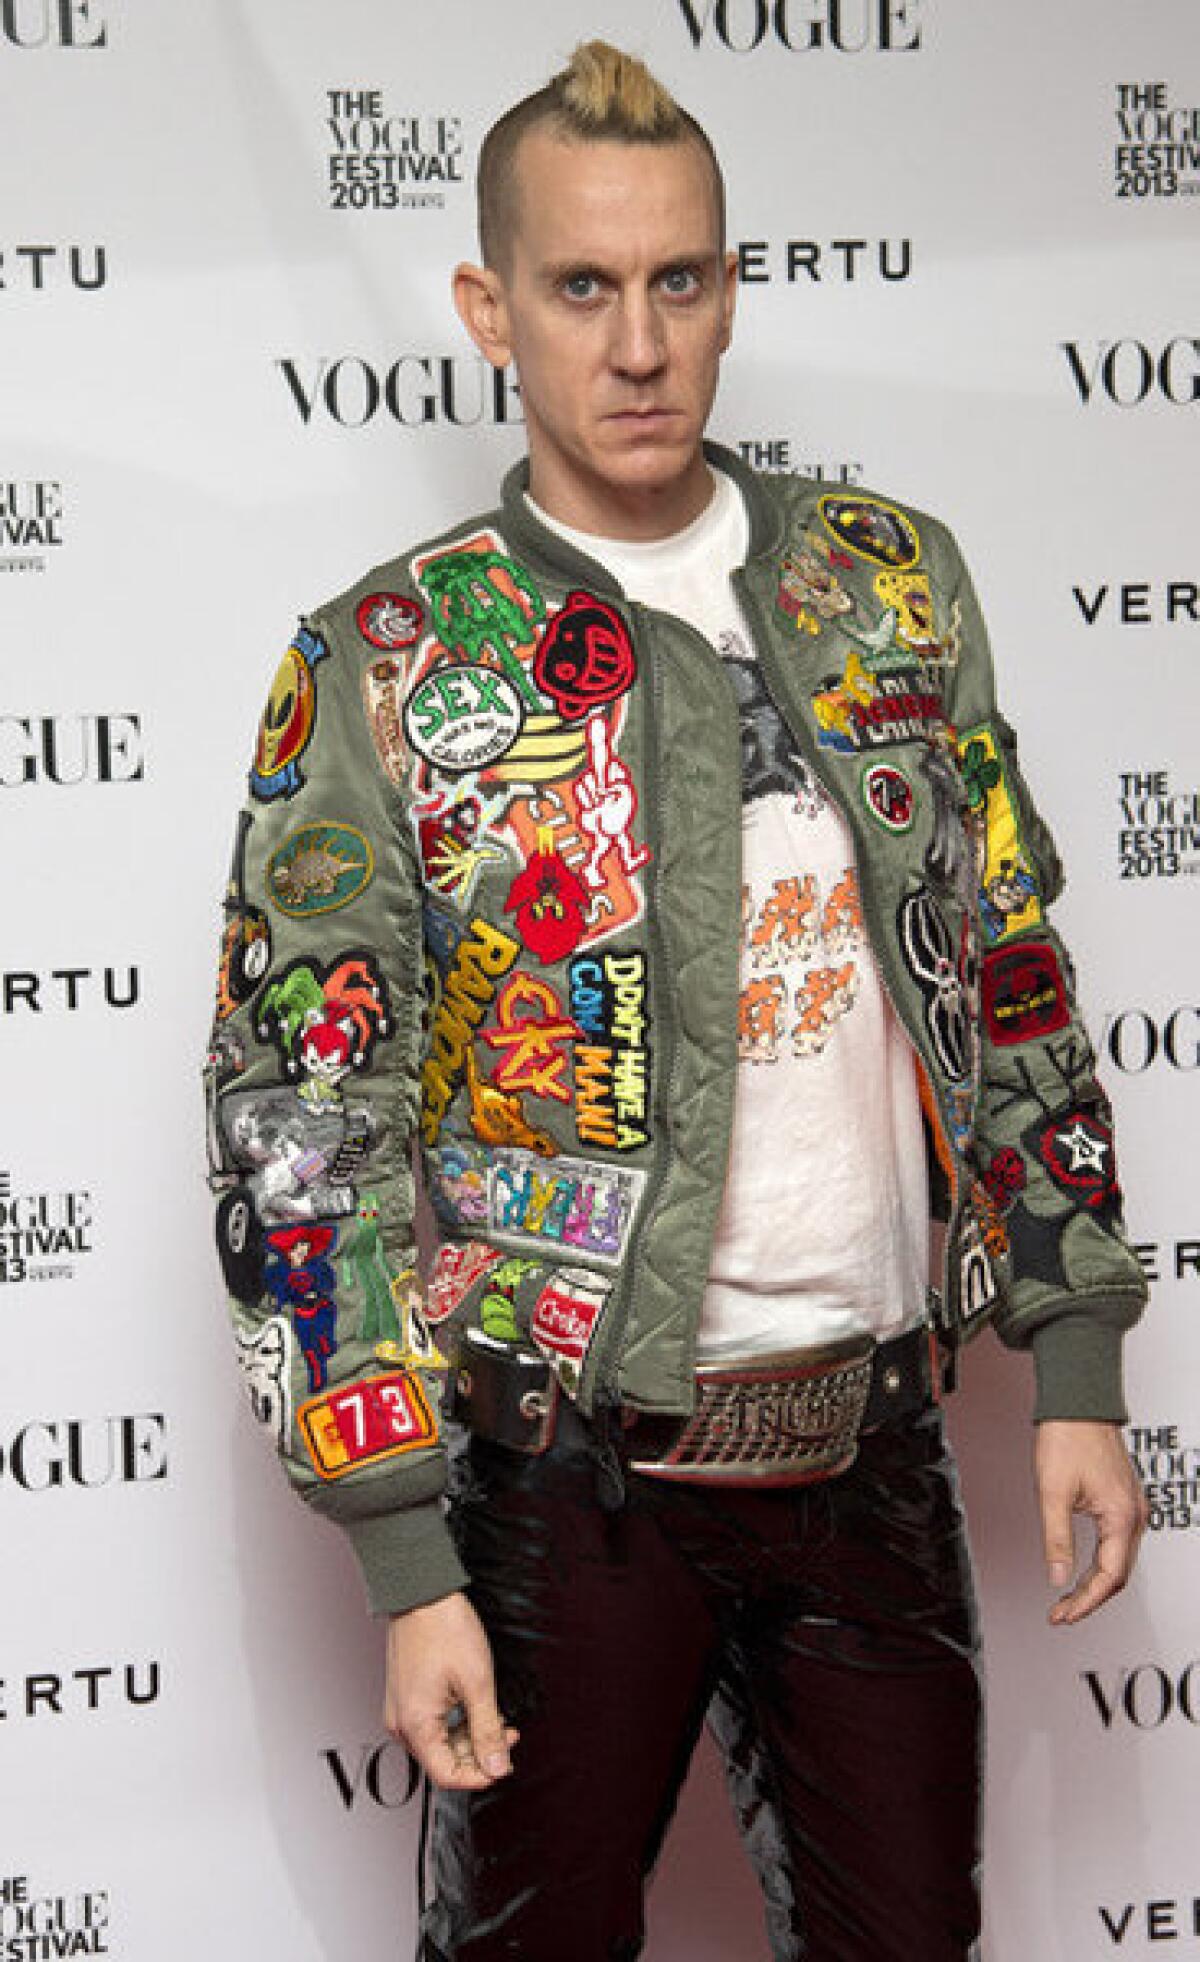 Jeremy Scott is the new creative director at Moschino.